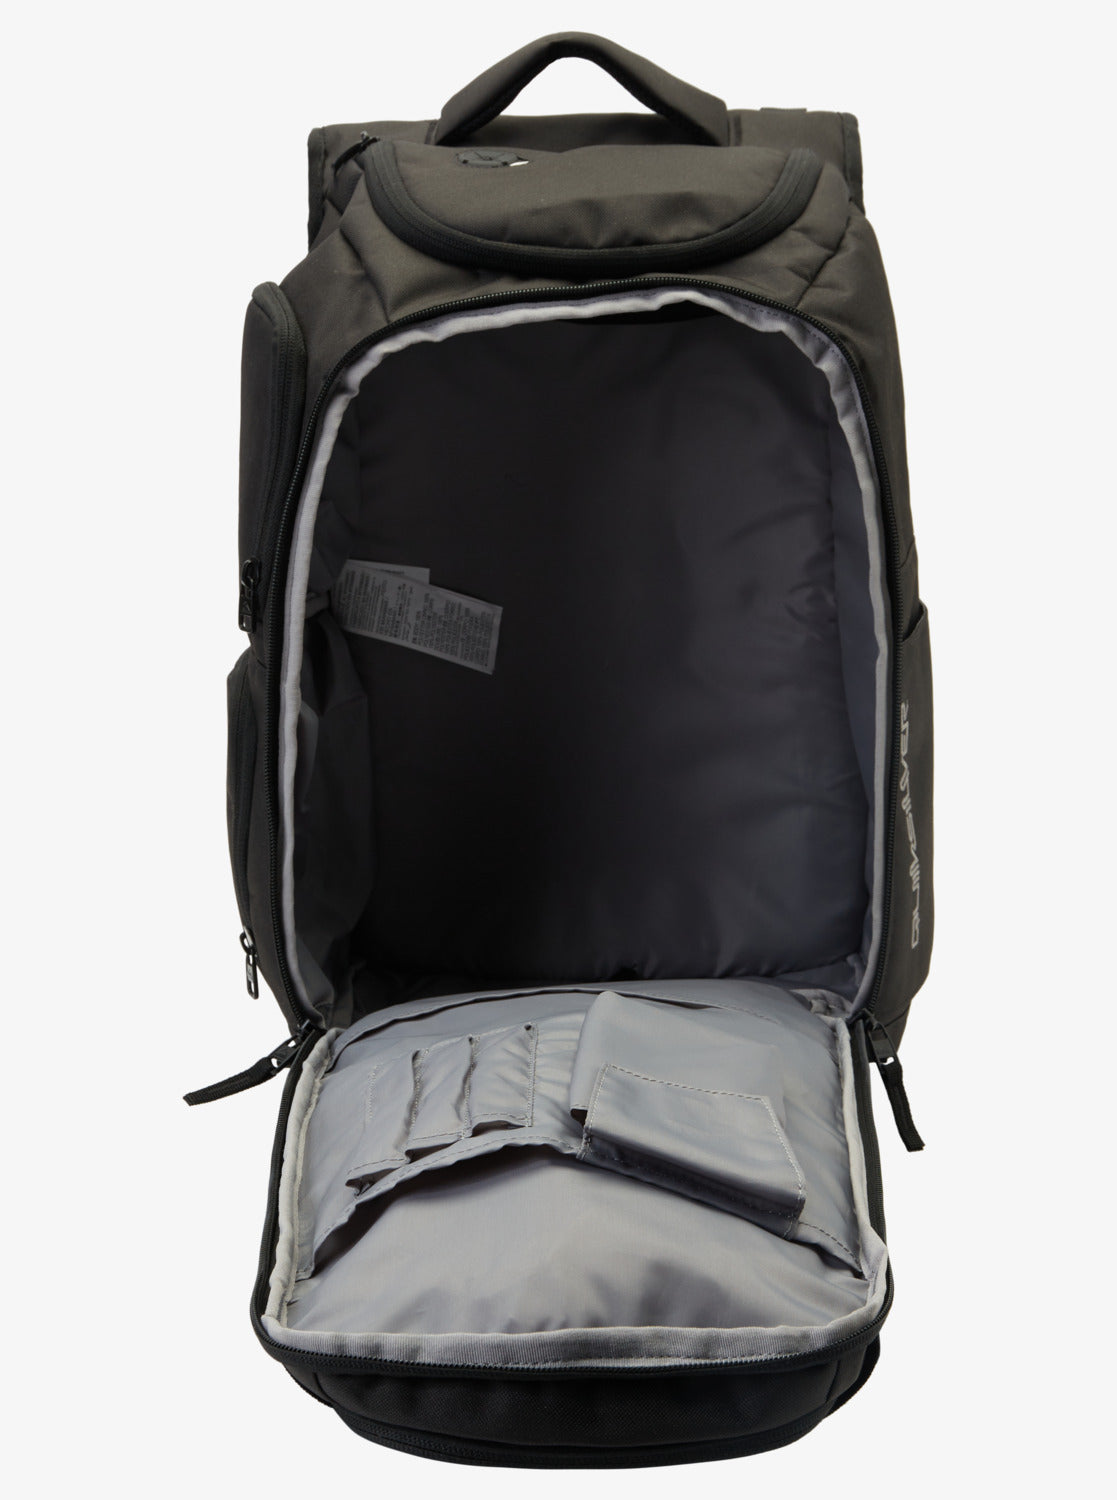 Quiksilver Grenade 32 L Large Premium Backpack in black showing open main compartment